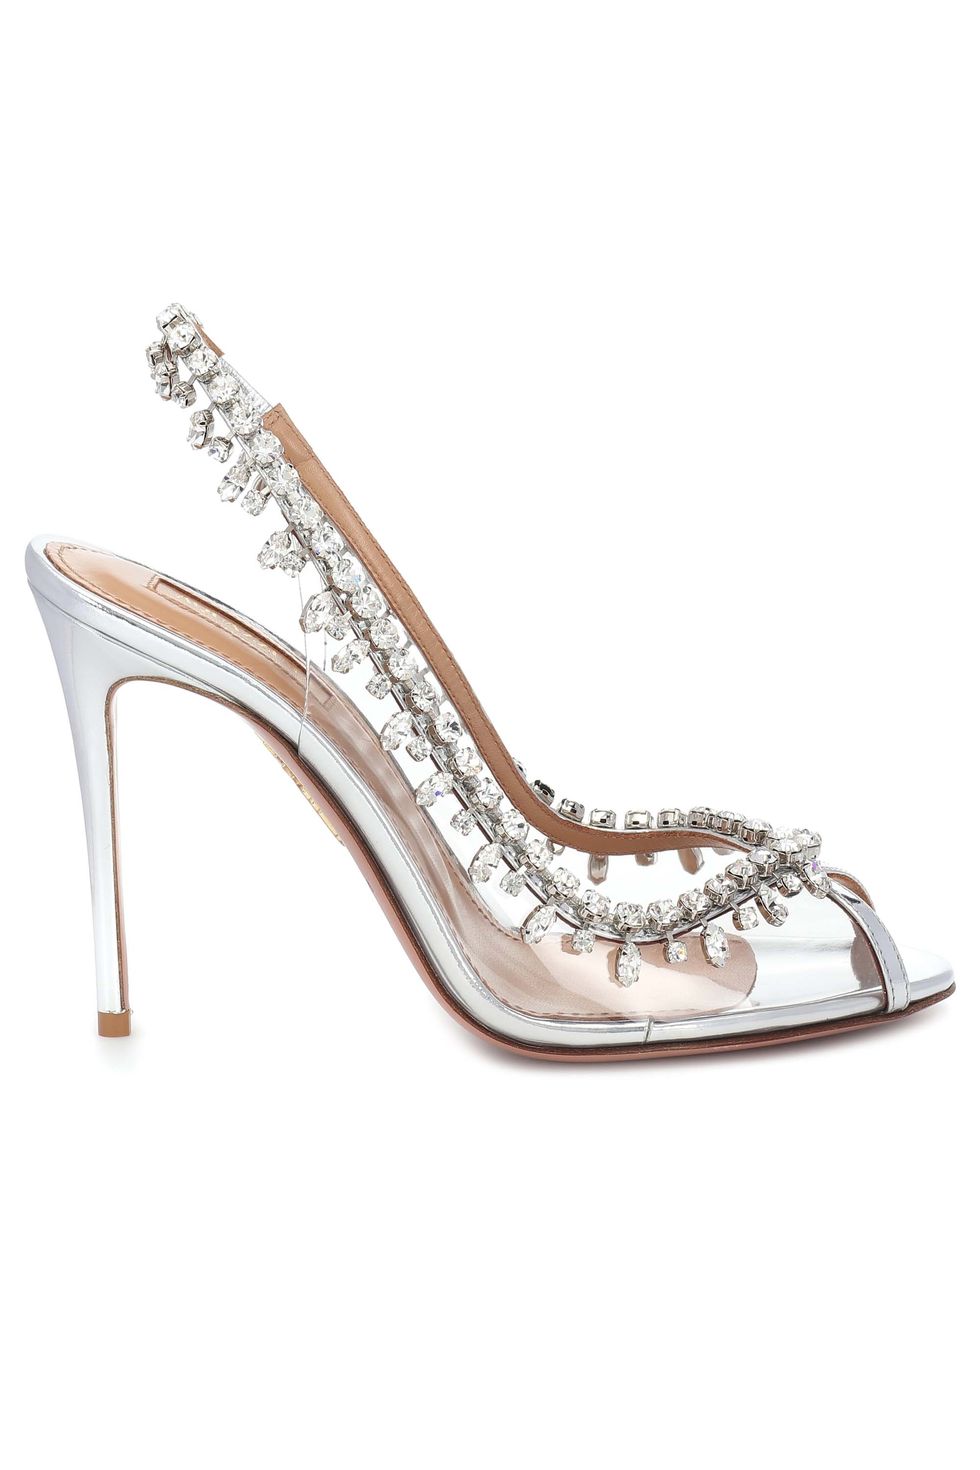 Cinderella shoes: The most unlikely trend of 2020, but perfect for ...